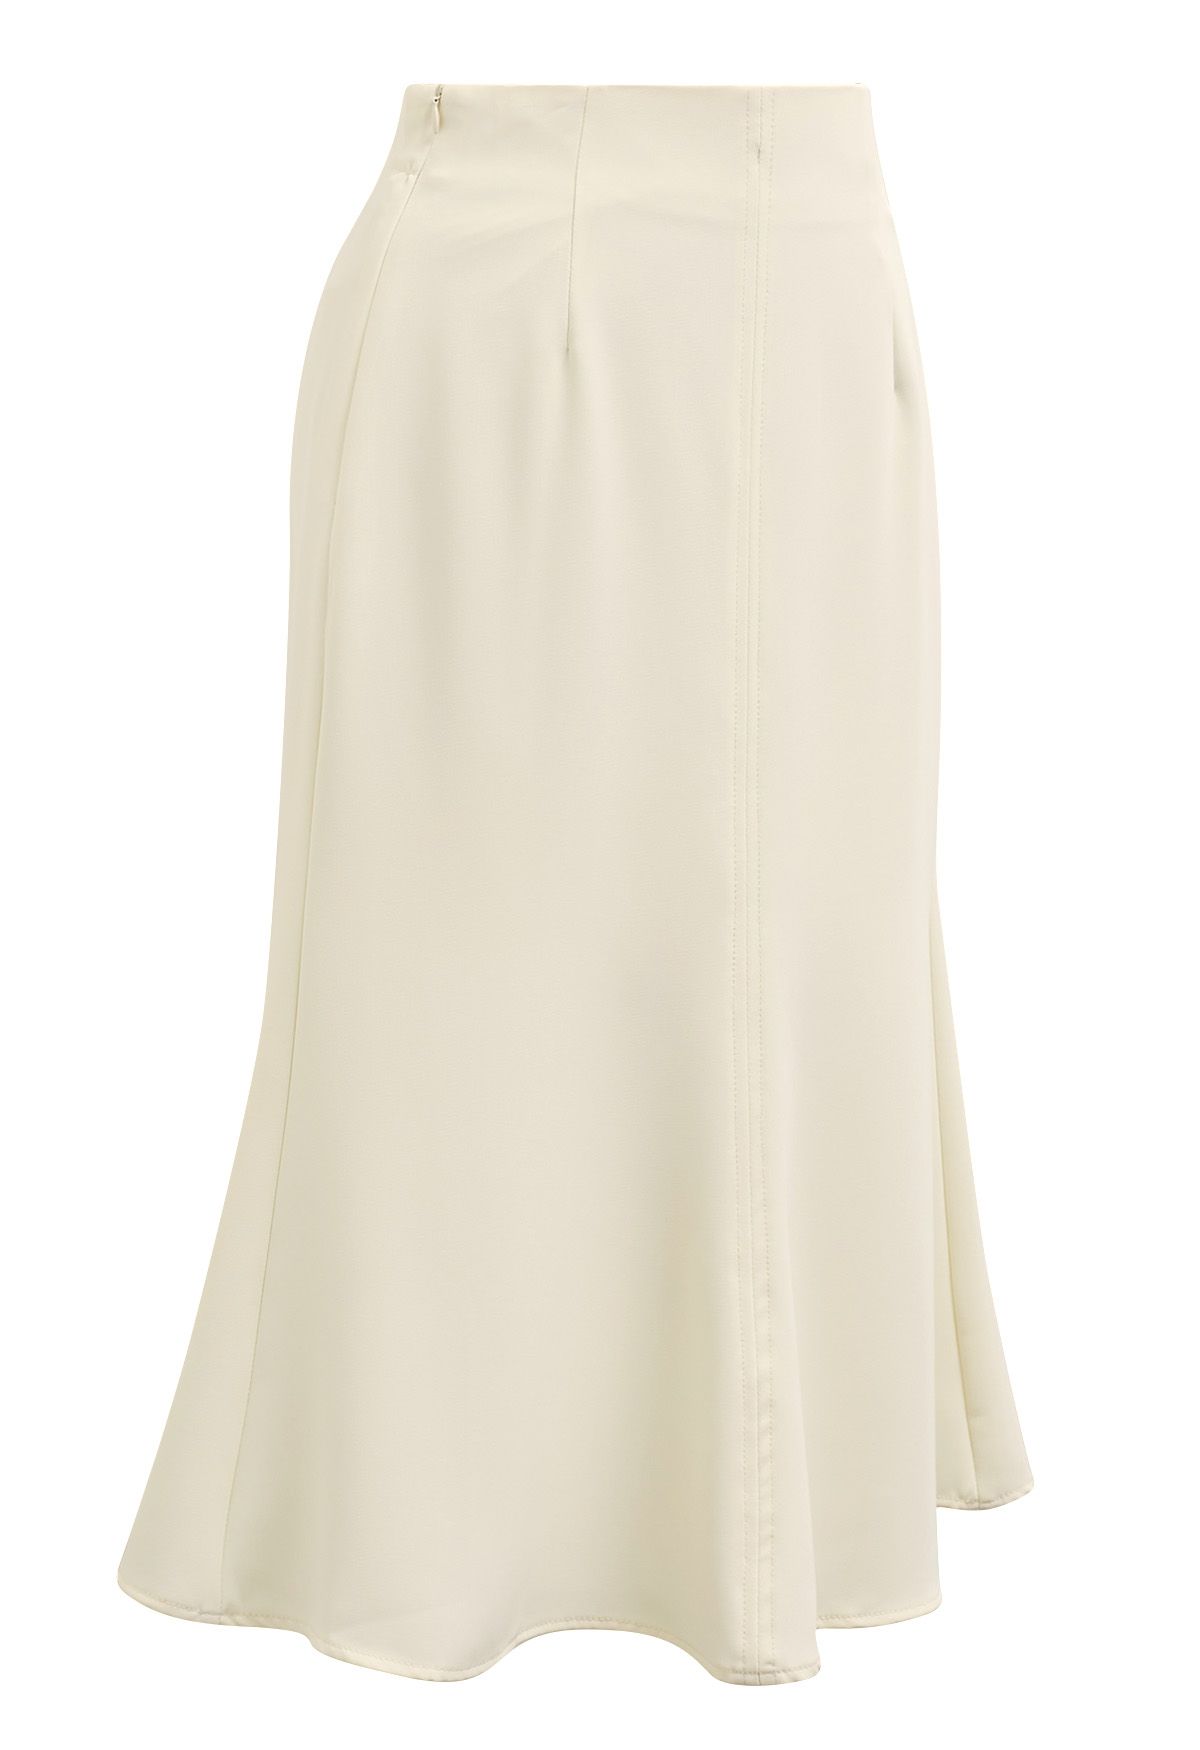 Solid Color Frilling Skirt in Light Yellow